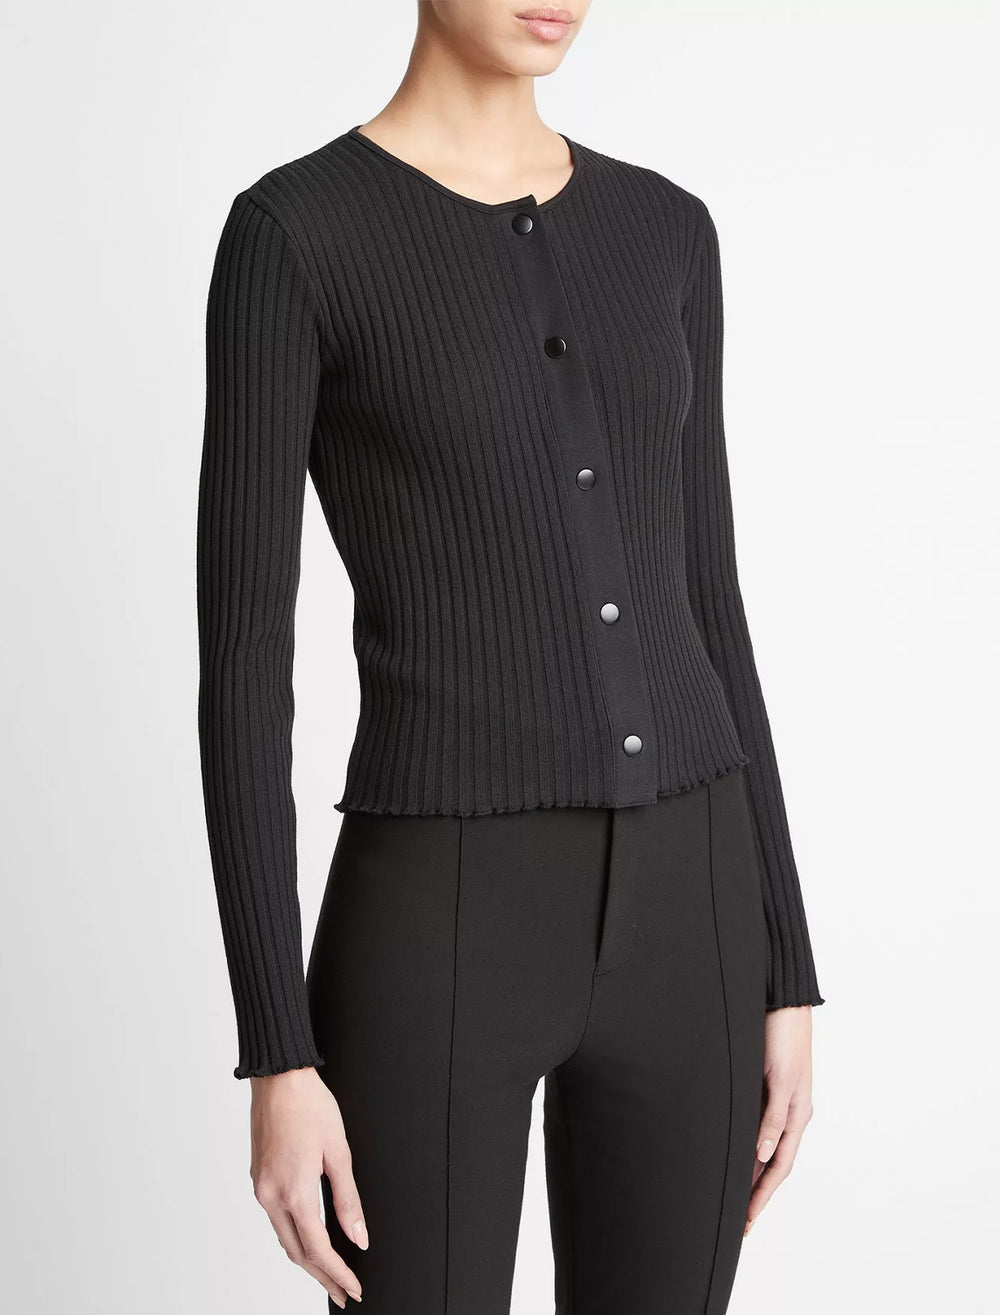 Model wearing Vince's ribbed cardigan in black.